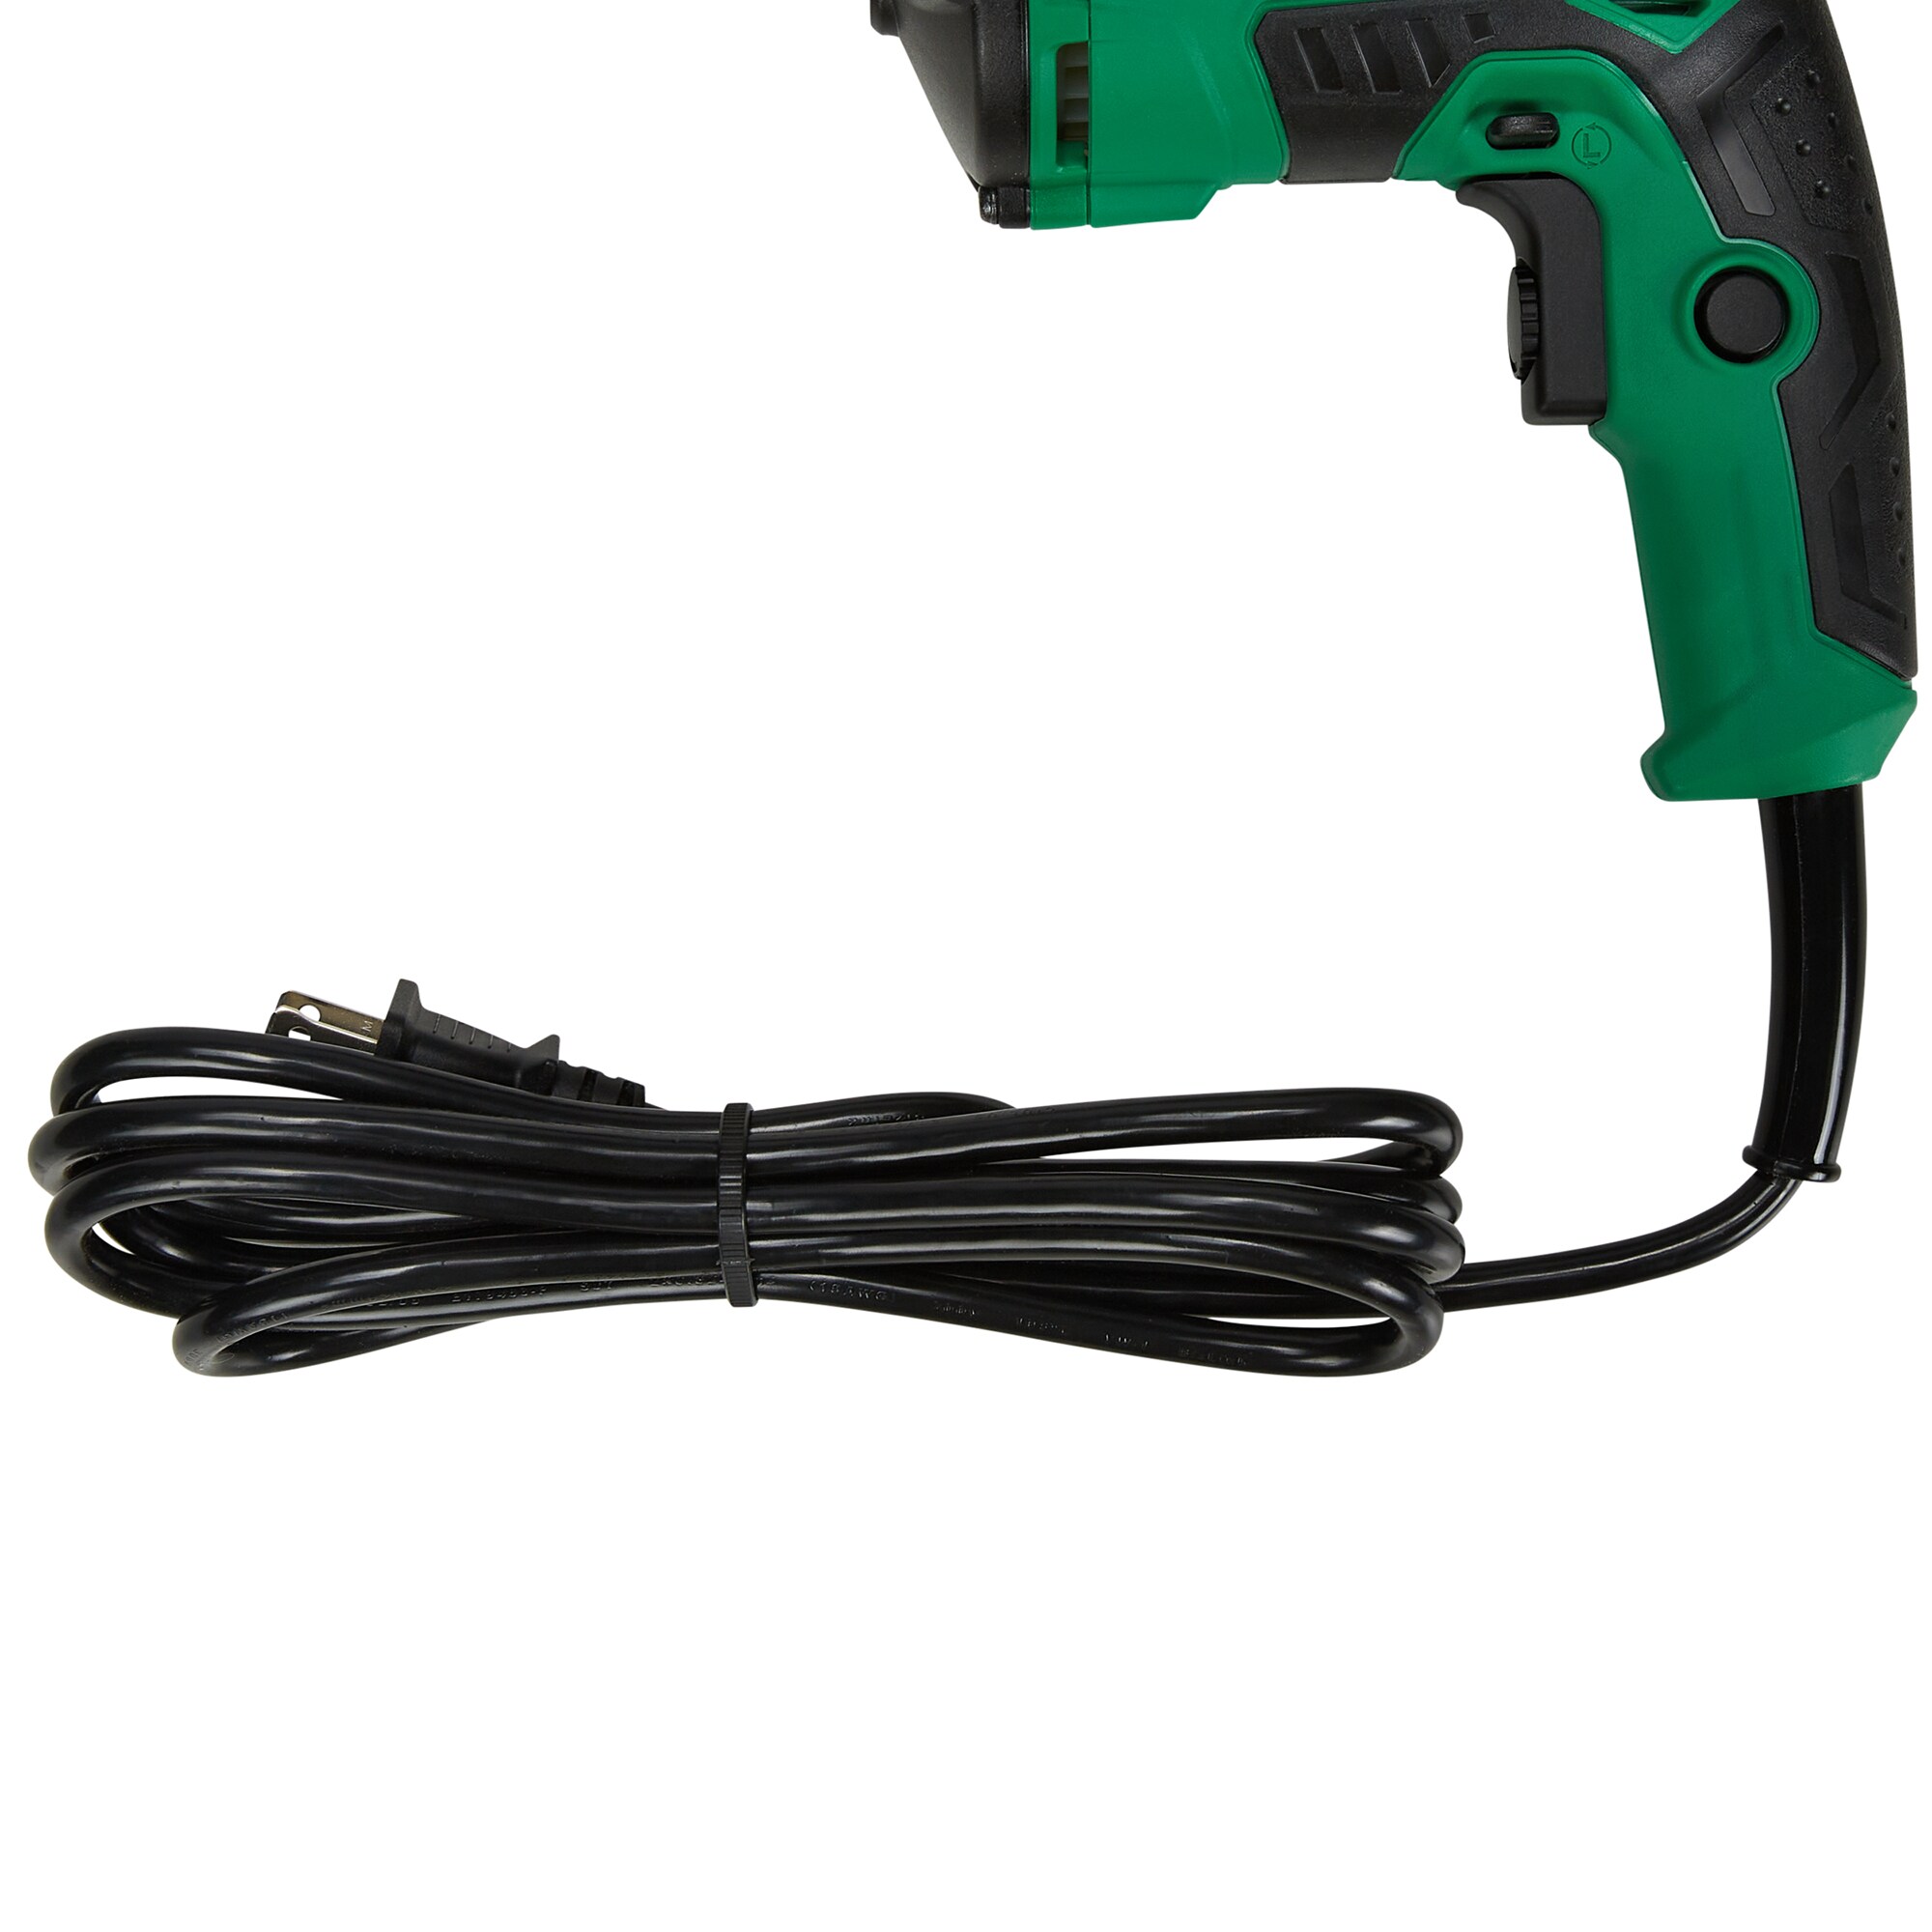 Variable Speed Trigger Metal Keyless Chuck 0-2,700 RPM 7.0 Amp Discontinued by the Manufacturer 5 Year Warranty Hitachi D10VH2 3/8 inch Corded Drill 